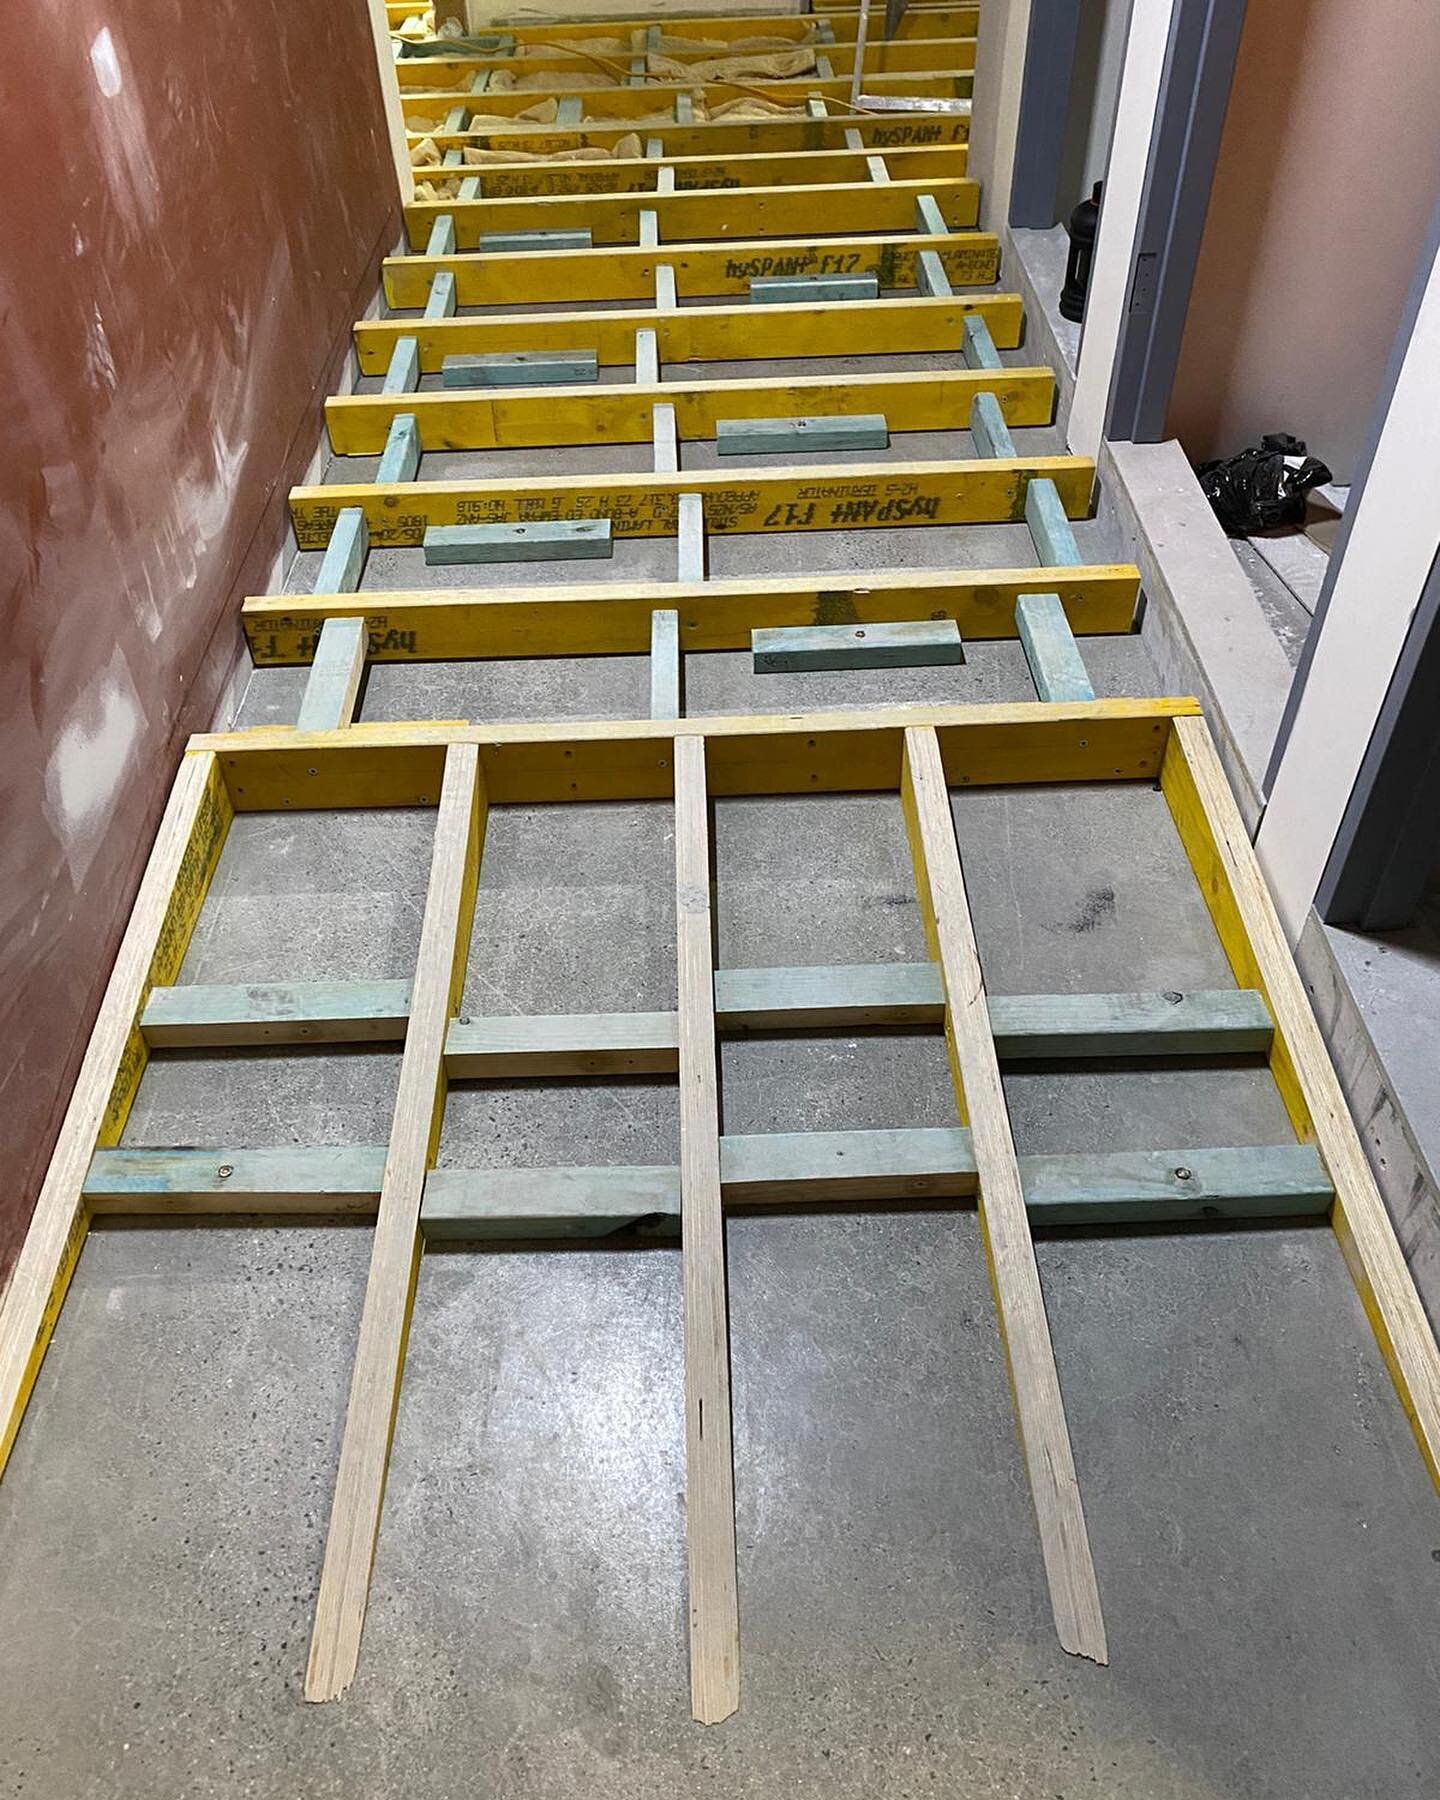 Some pictures of our acoustic flooring system on a commercial site 💯 swipe to see more ▶️

This flooring system consisted of a H2 LVL structural frame (Hyspan F17), which was levelled and fixed to the slab appropriately. After constructing a ramp fo